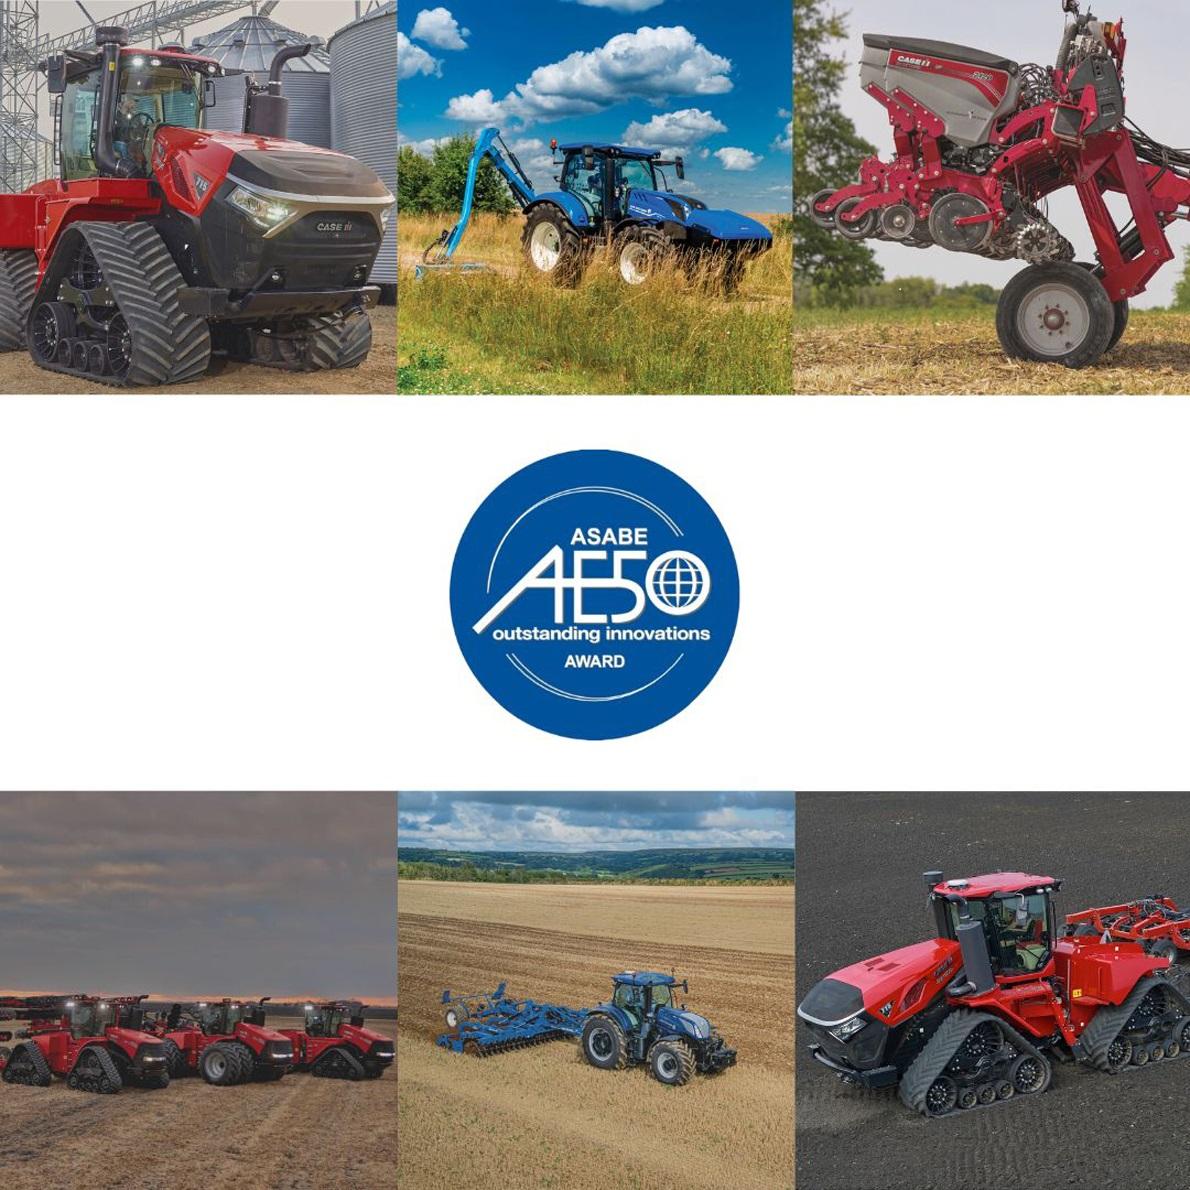 Images of tractors and AE50 logo